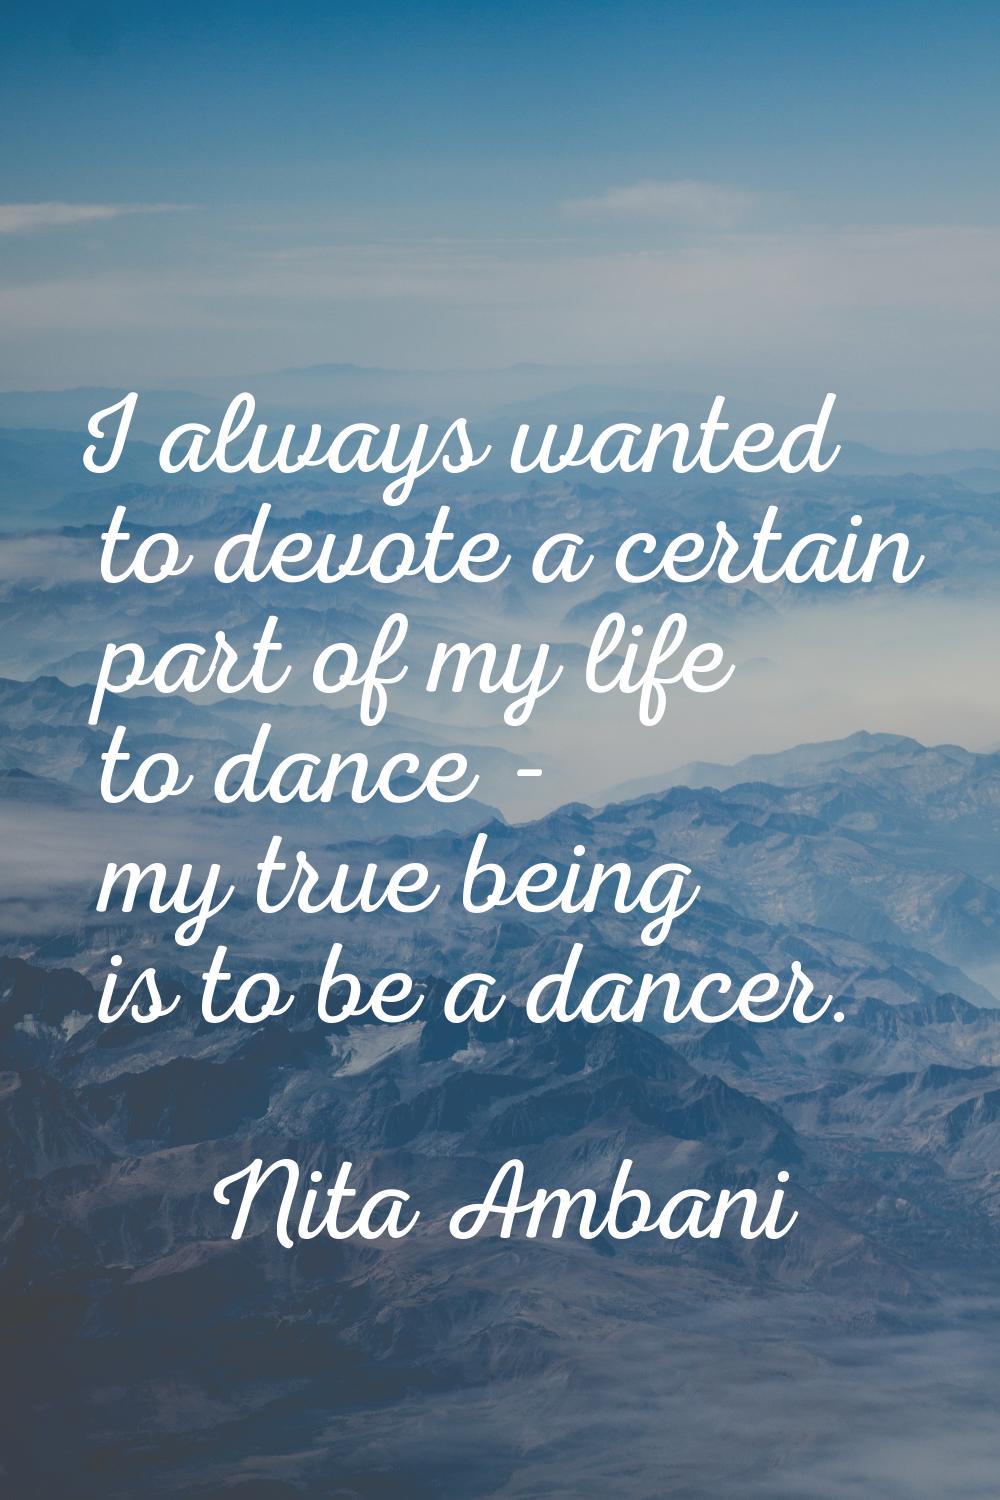 I always wanted to devote a certain part of my life to dance - my true being is to be a dancer.